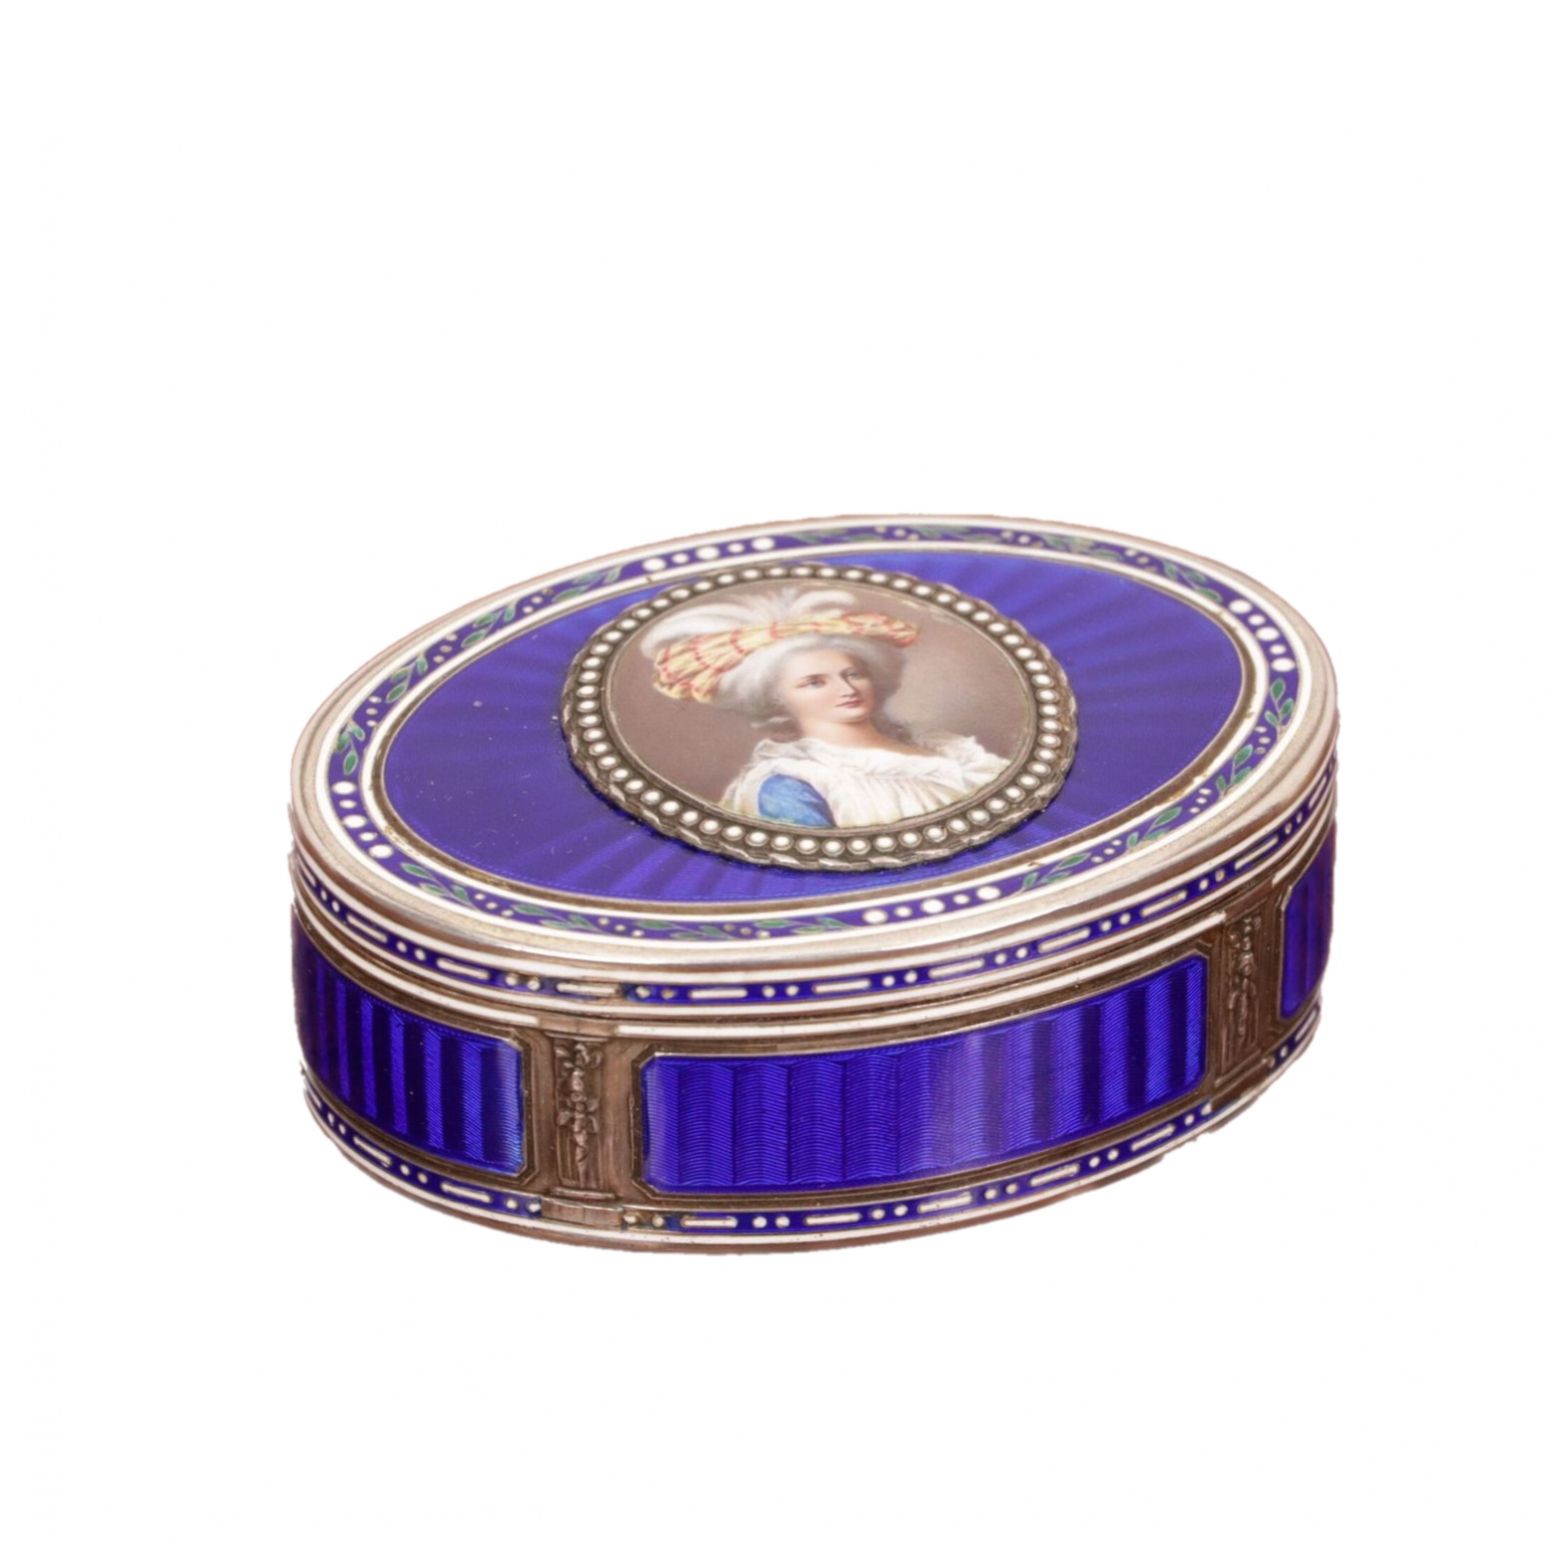 Oval box made of gilded silver with guilloche enamel decor. Early 20th century. - Image 8 of 9